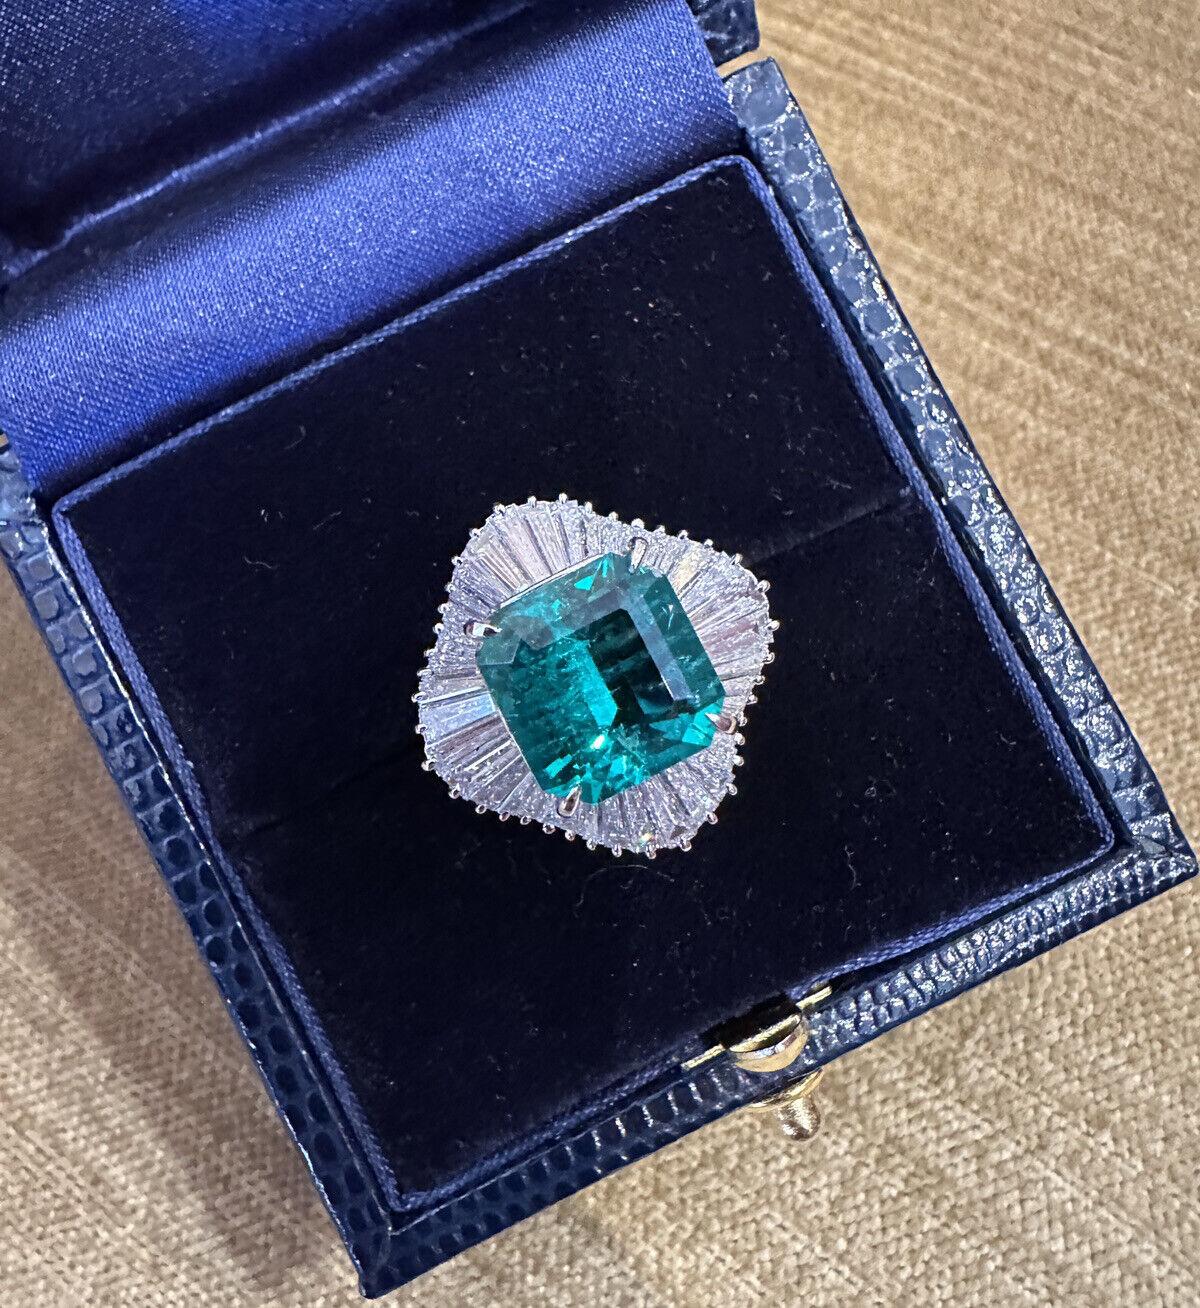 GRS 3.39 Carat Colombian Emerald Ballerina Diamond Cocktail Ring in Platinum In Excellent Condition For Sale In La Jolla, CA